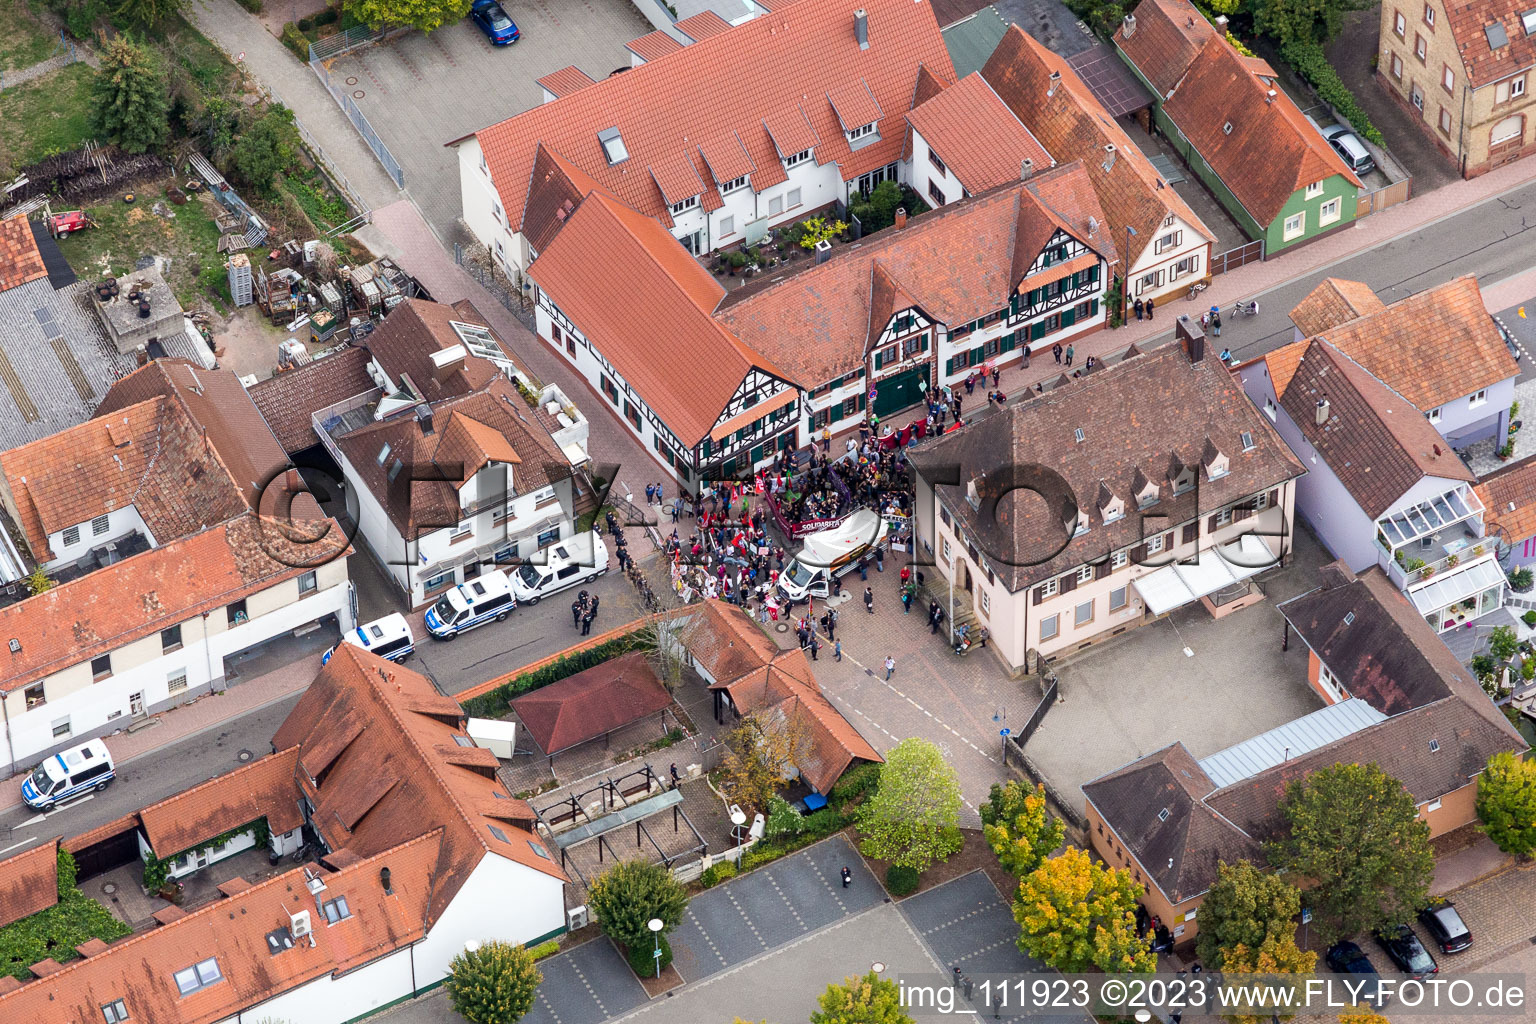 Demo “Women’s Alliance Kandel” vs. “AntiFa/We are Kandel/Grandmas against the right in Kandel in the state Rhineland-Palatinate, Germany from above